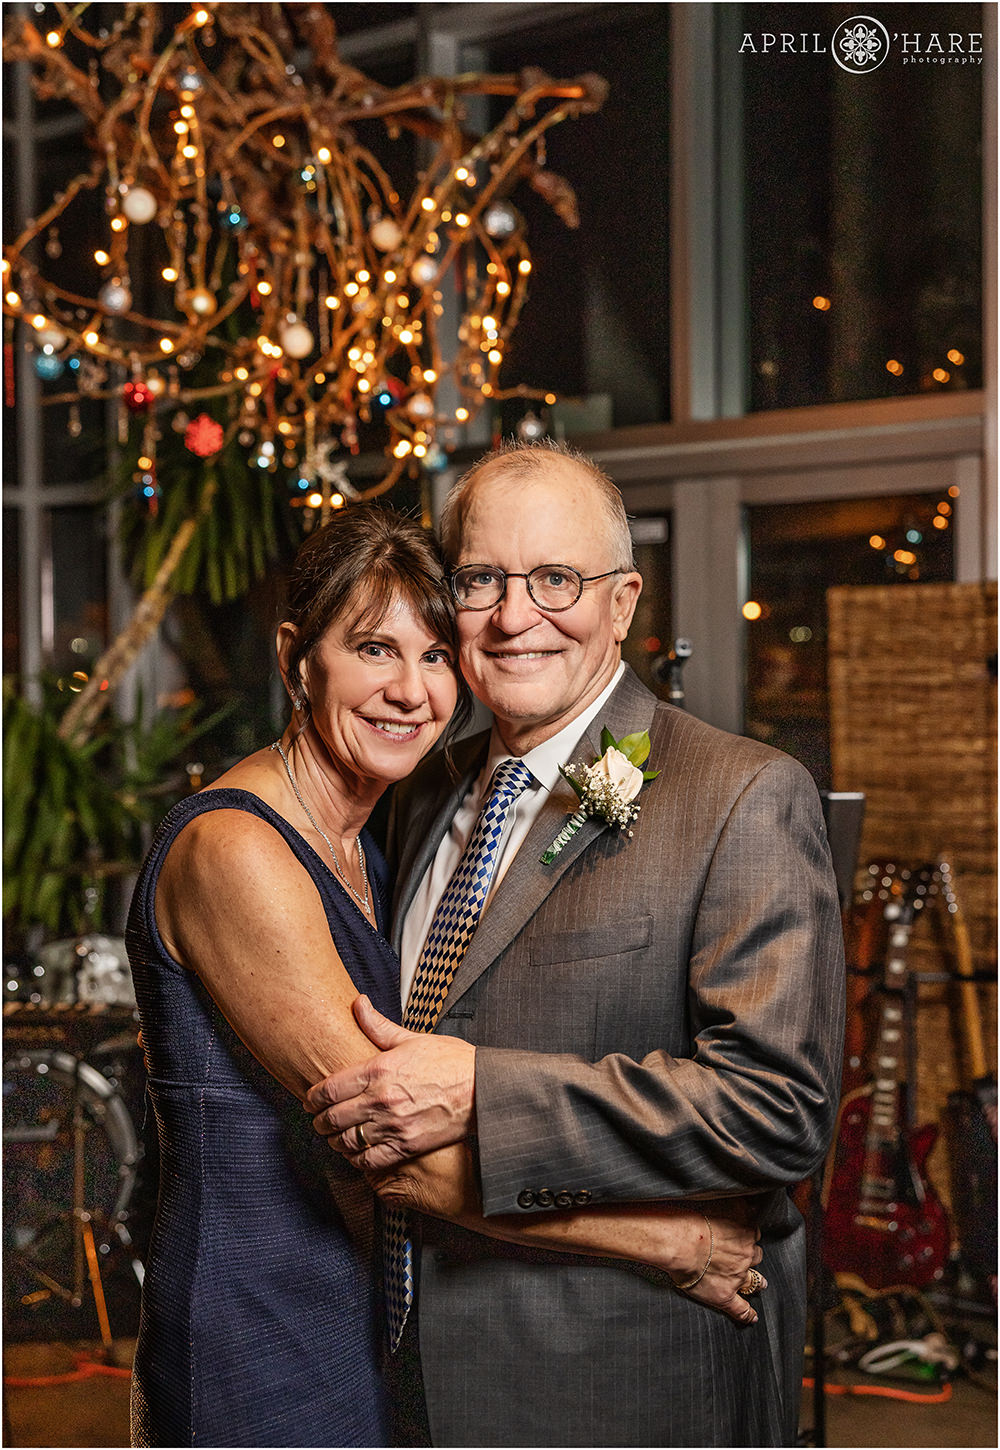 Parents of the groom at a NYE wedding party in Denver CO